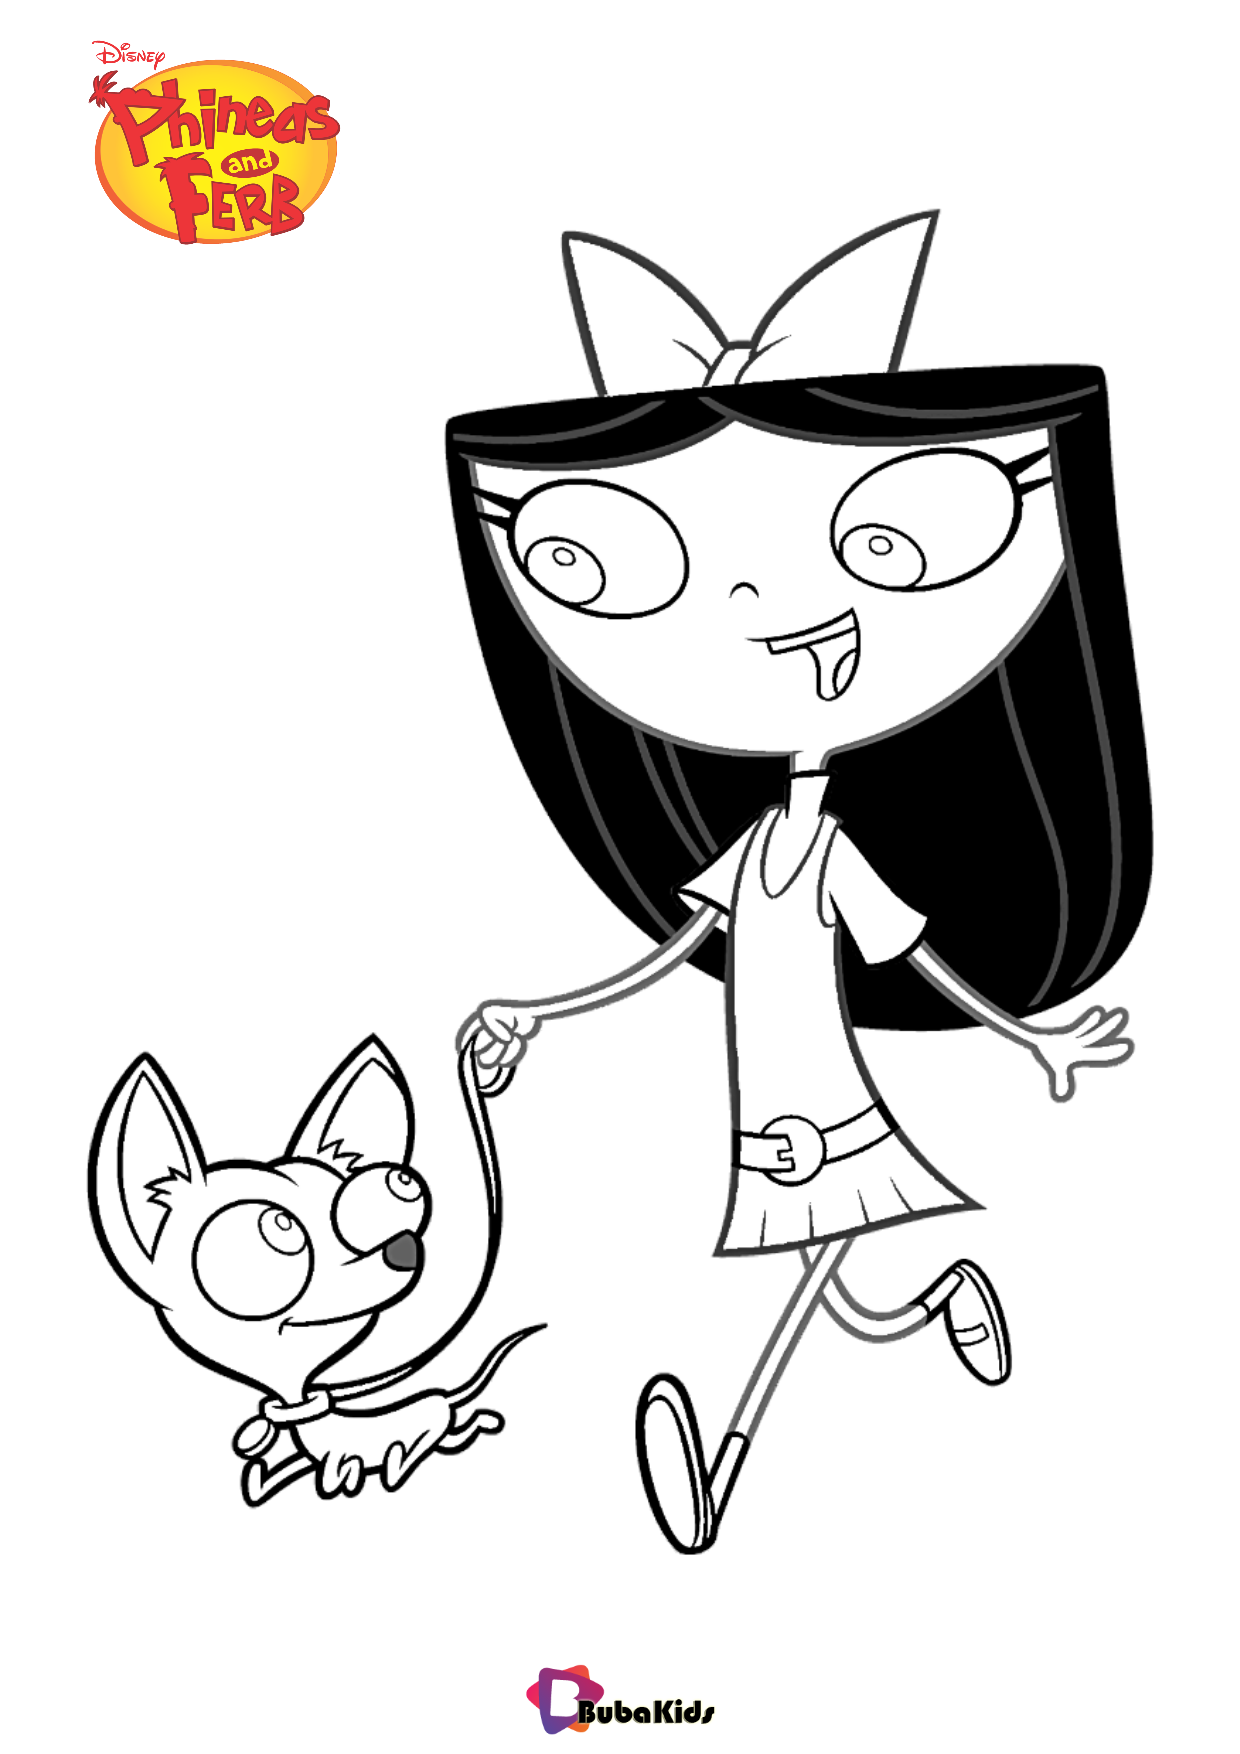 Isabella Garcia-Shapiro Phineas and Ferb coloring page